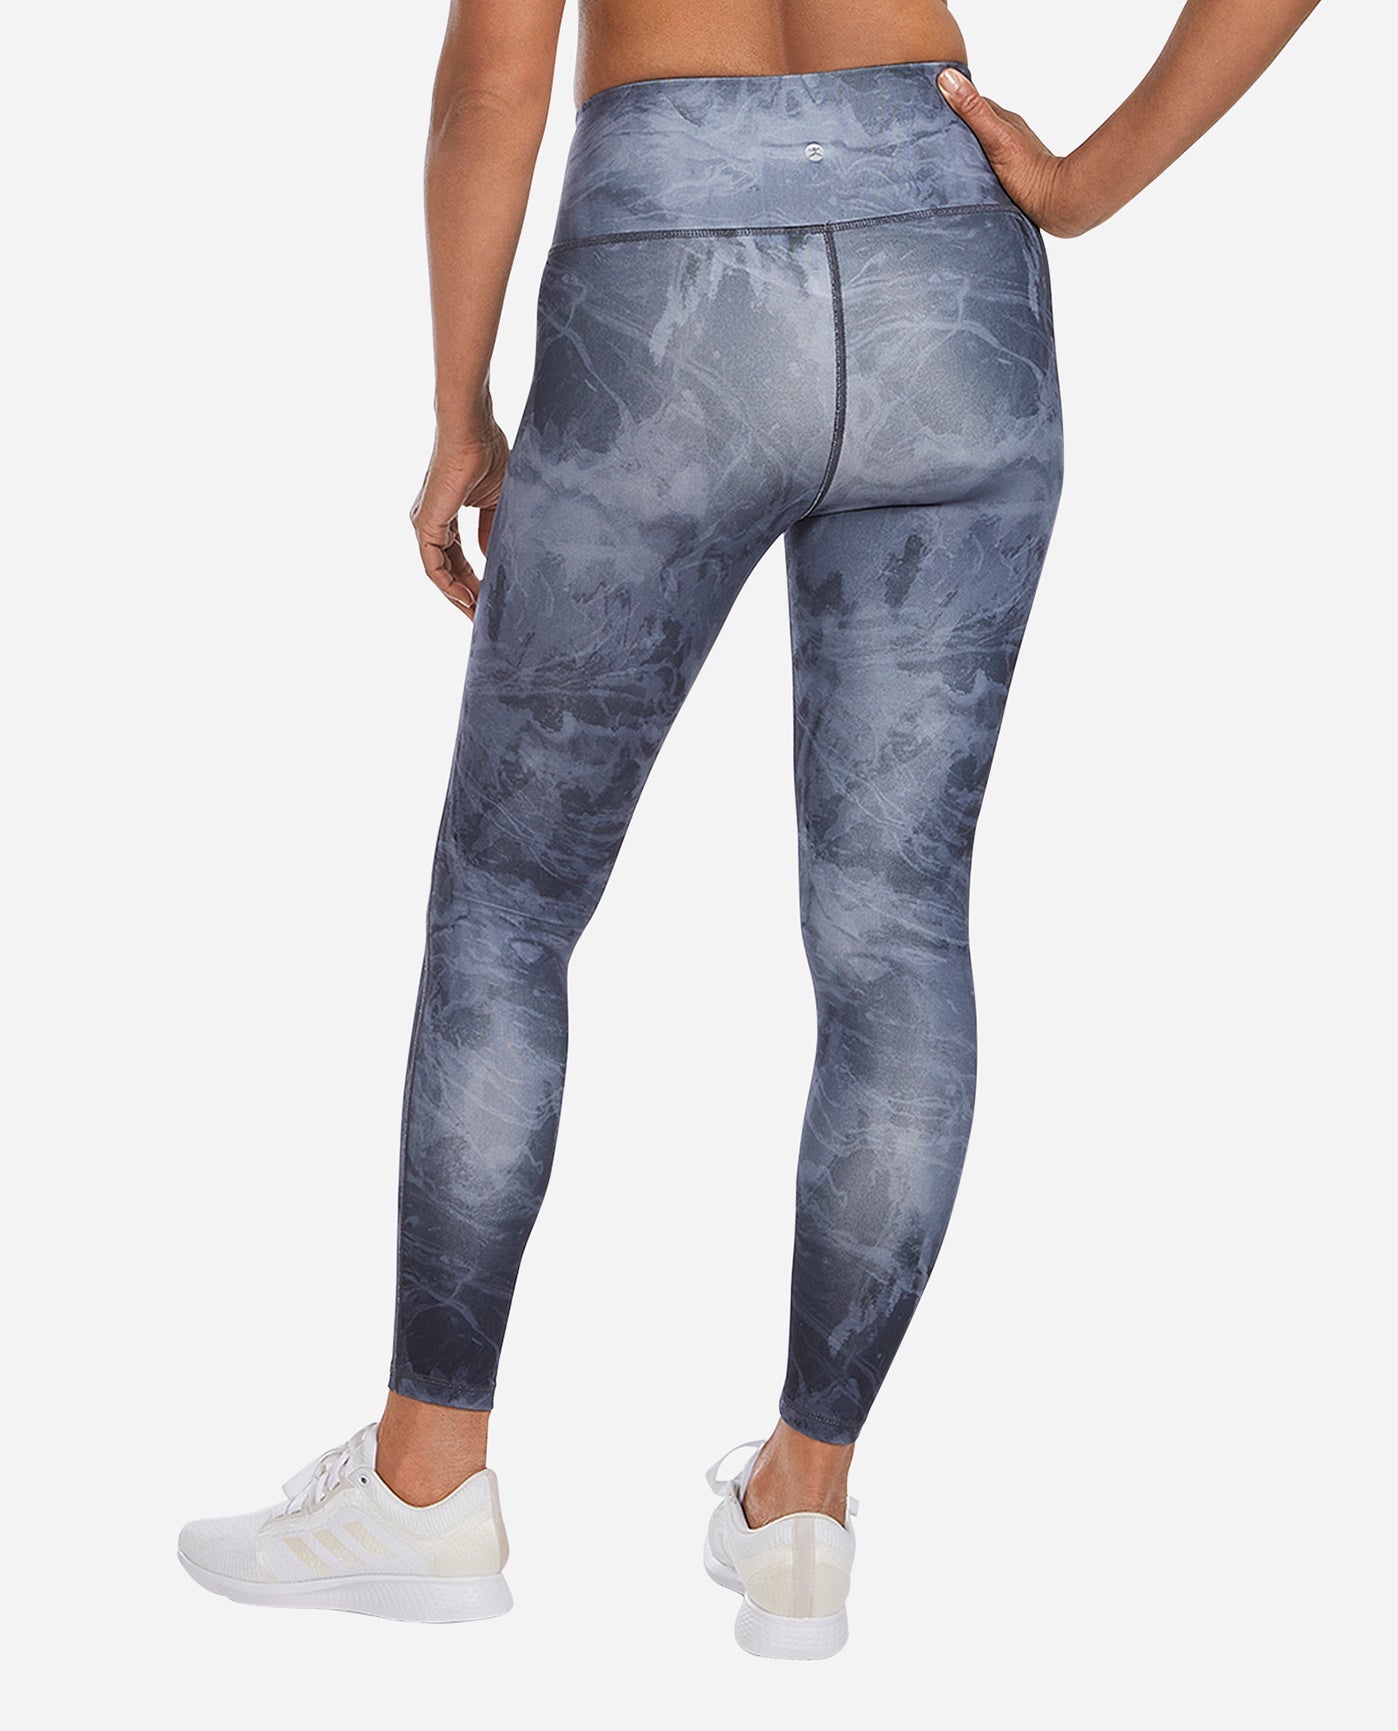 TWO PAIR DANSKIN Workout Leggings with phone pockets